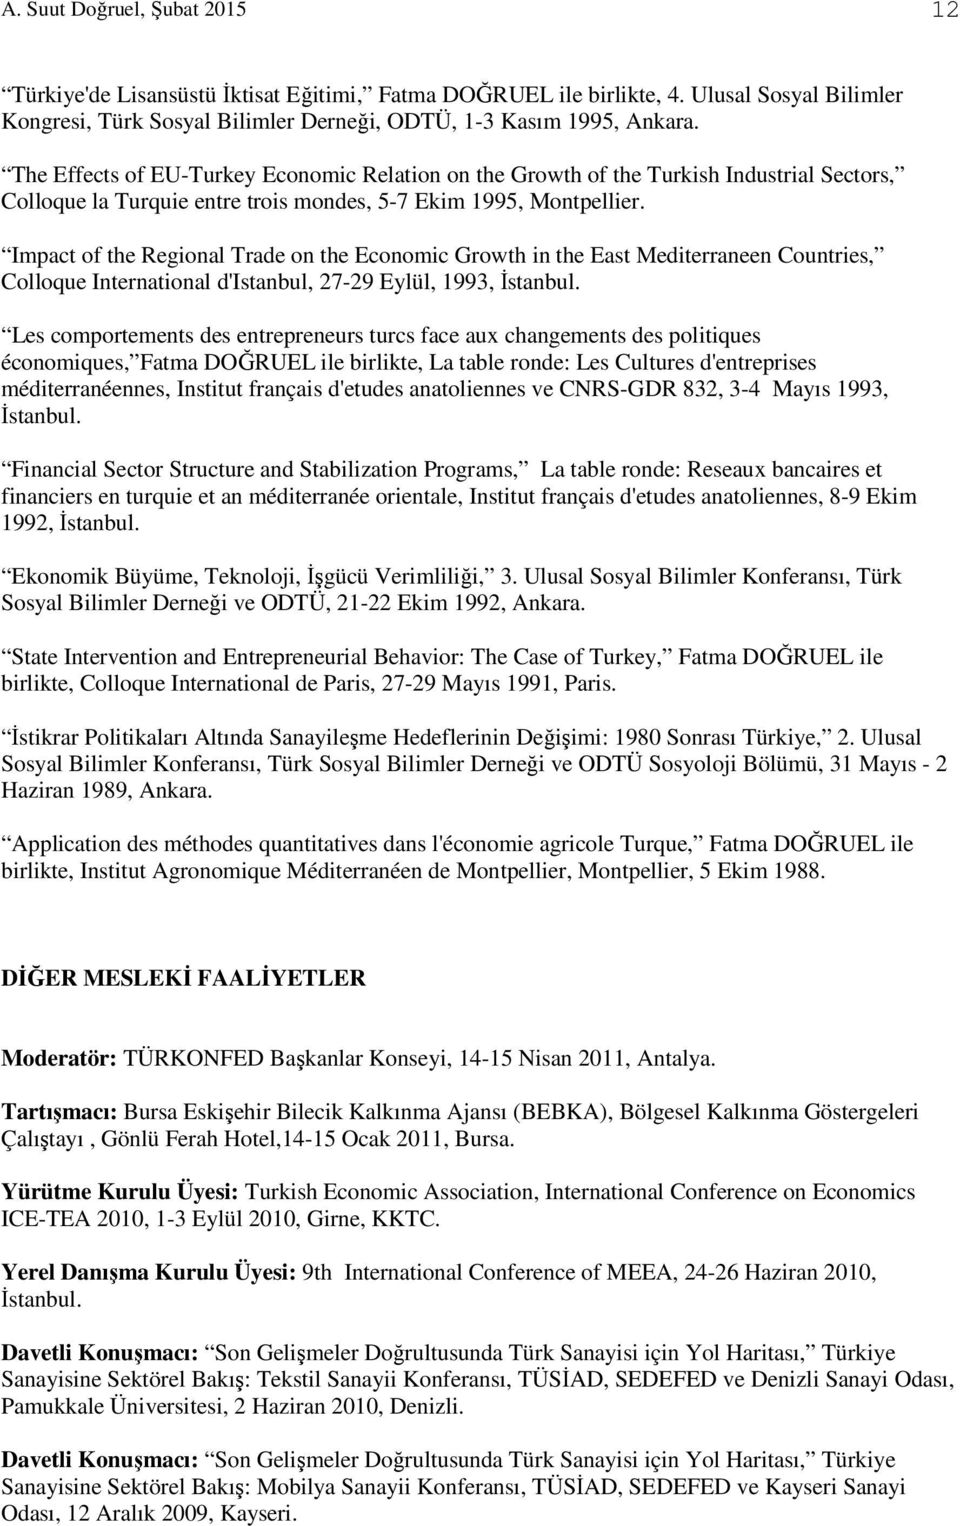 Impact of the Regional Trade on the Economic Growth in the East Mediterraneen Countries, Colloque International d'istanbul, 27-29 Eylül, 1993, İstanbul.